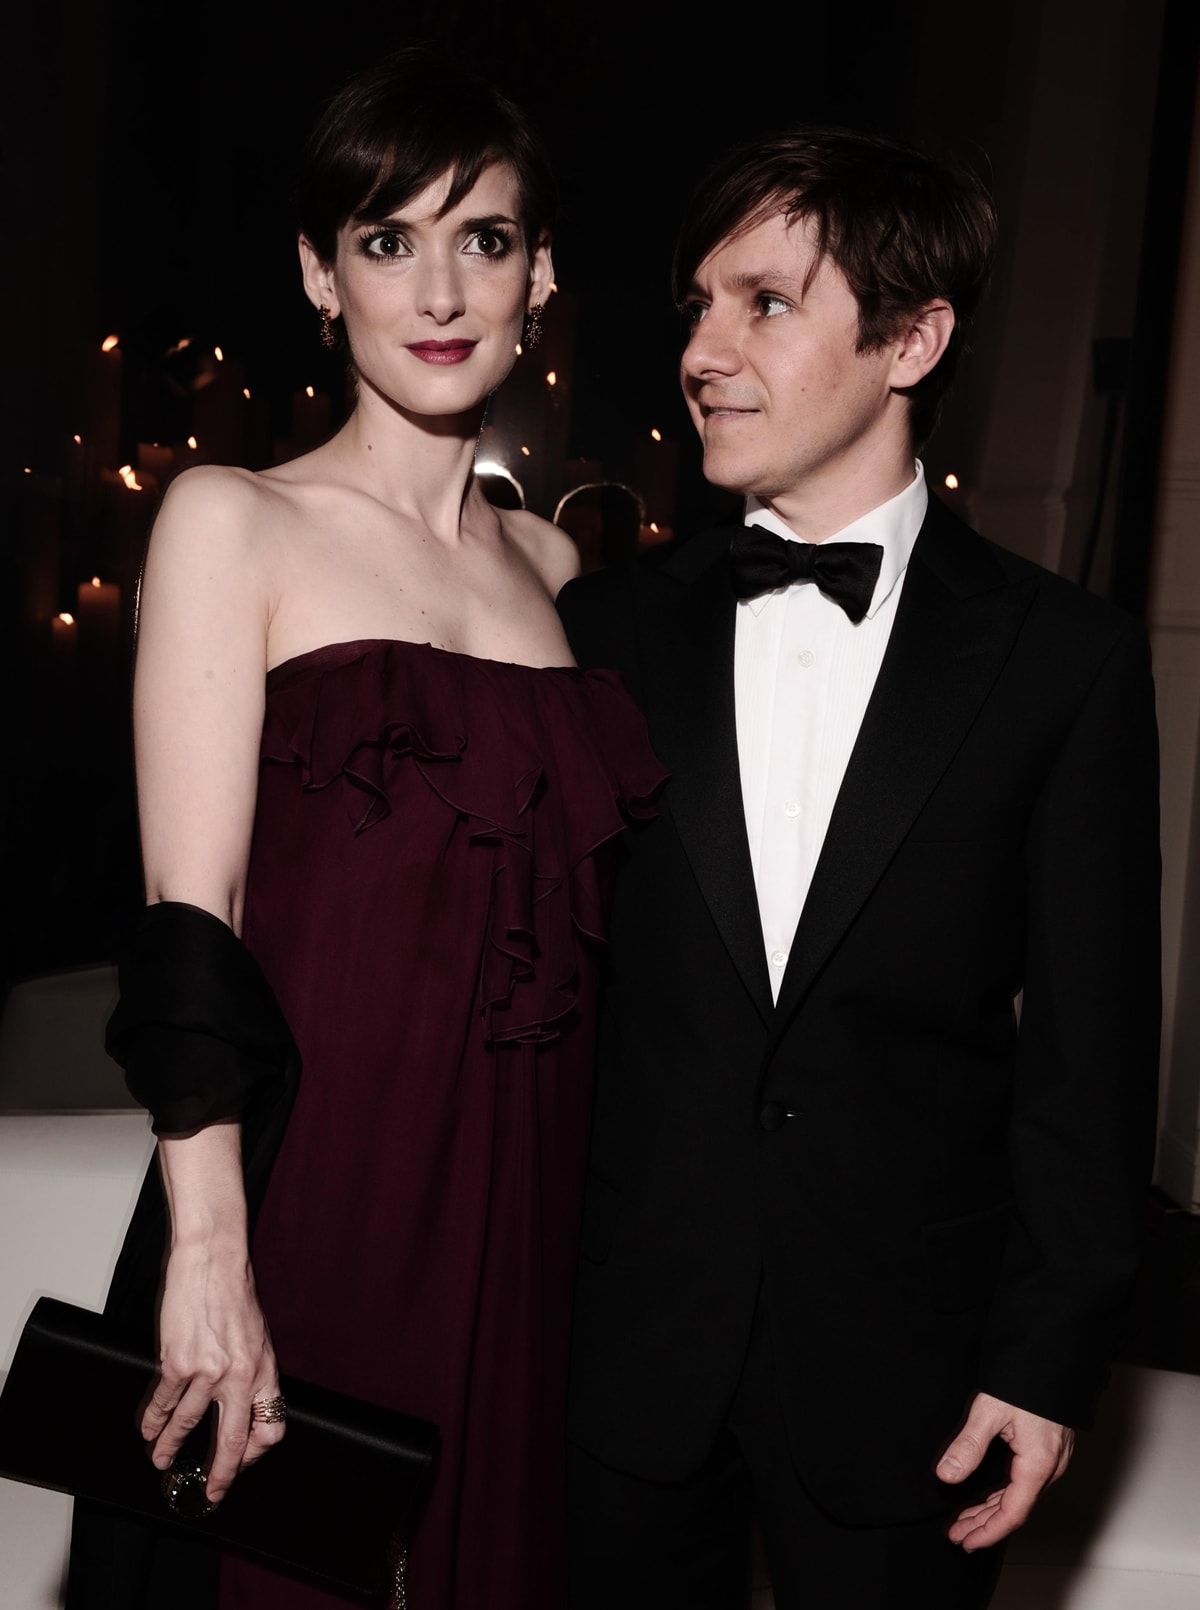 Winona Ryder and indie rock band Rilo Kiley guitarist Blake Sennett dated from 2007 to 2008